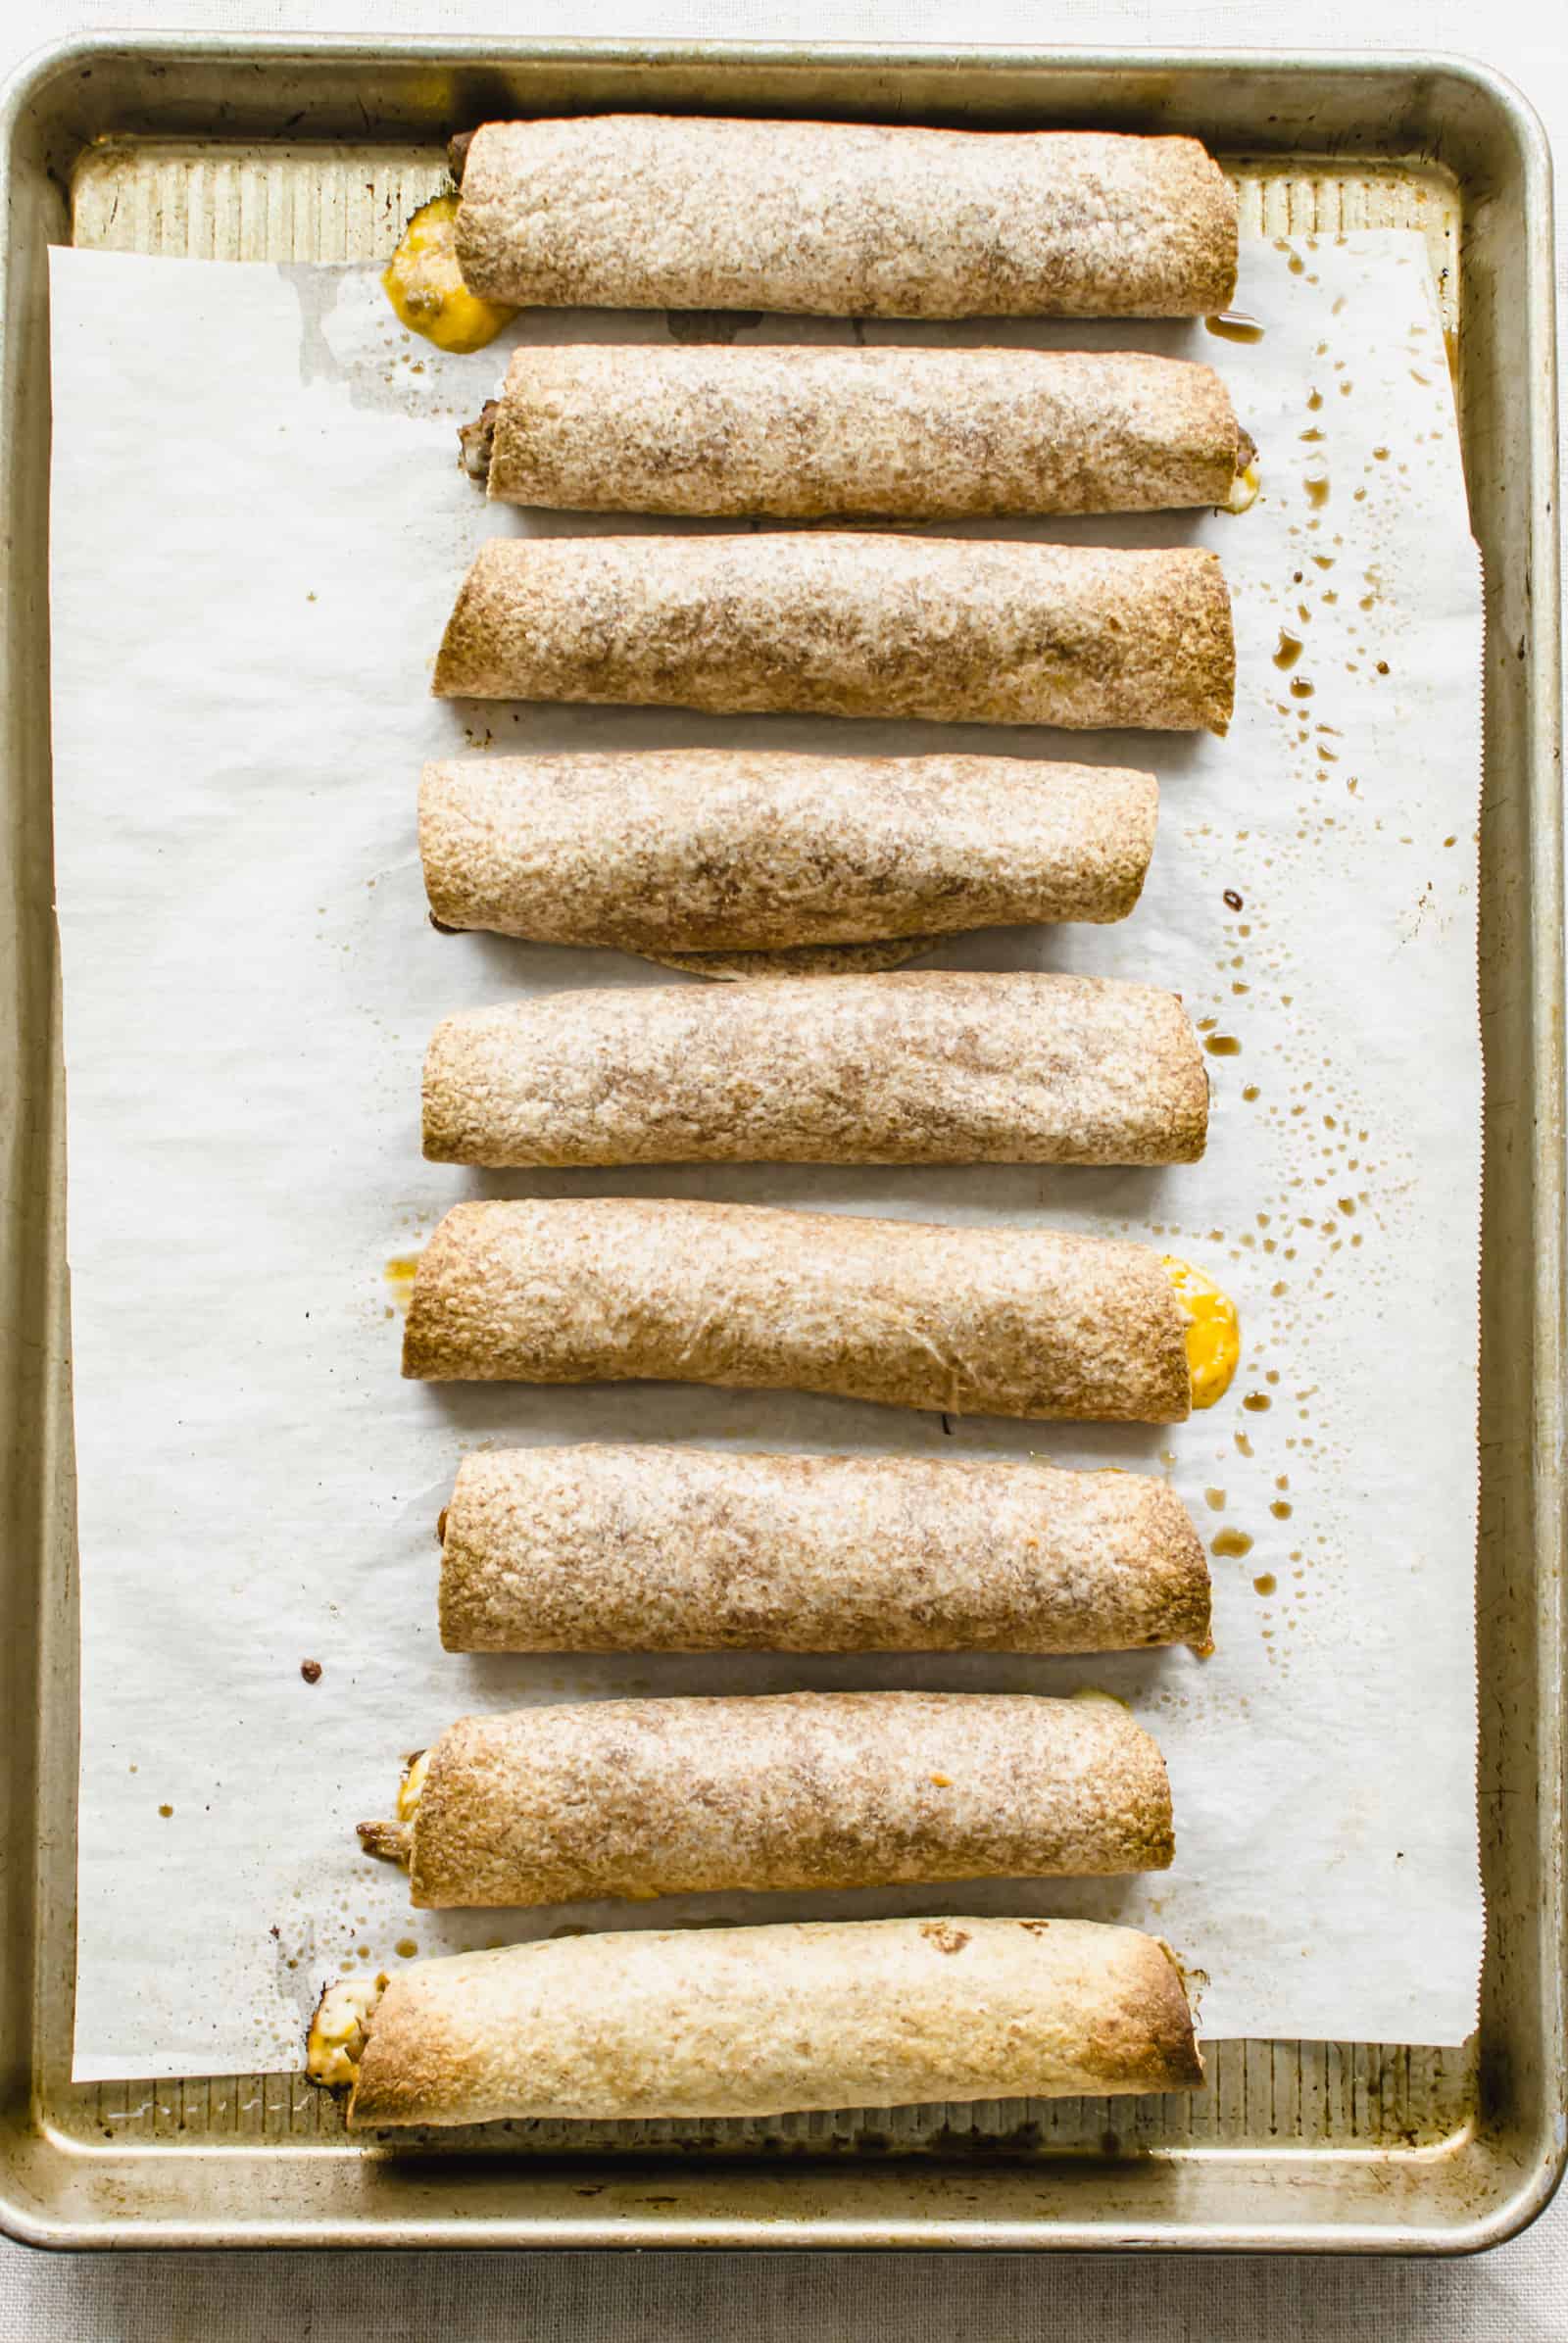 Cooked beef taquitos on a baking sheet lined with parchment paper.